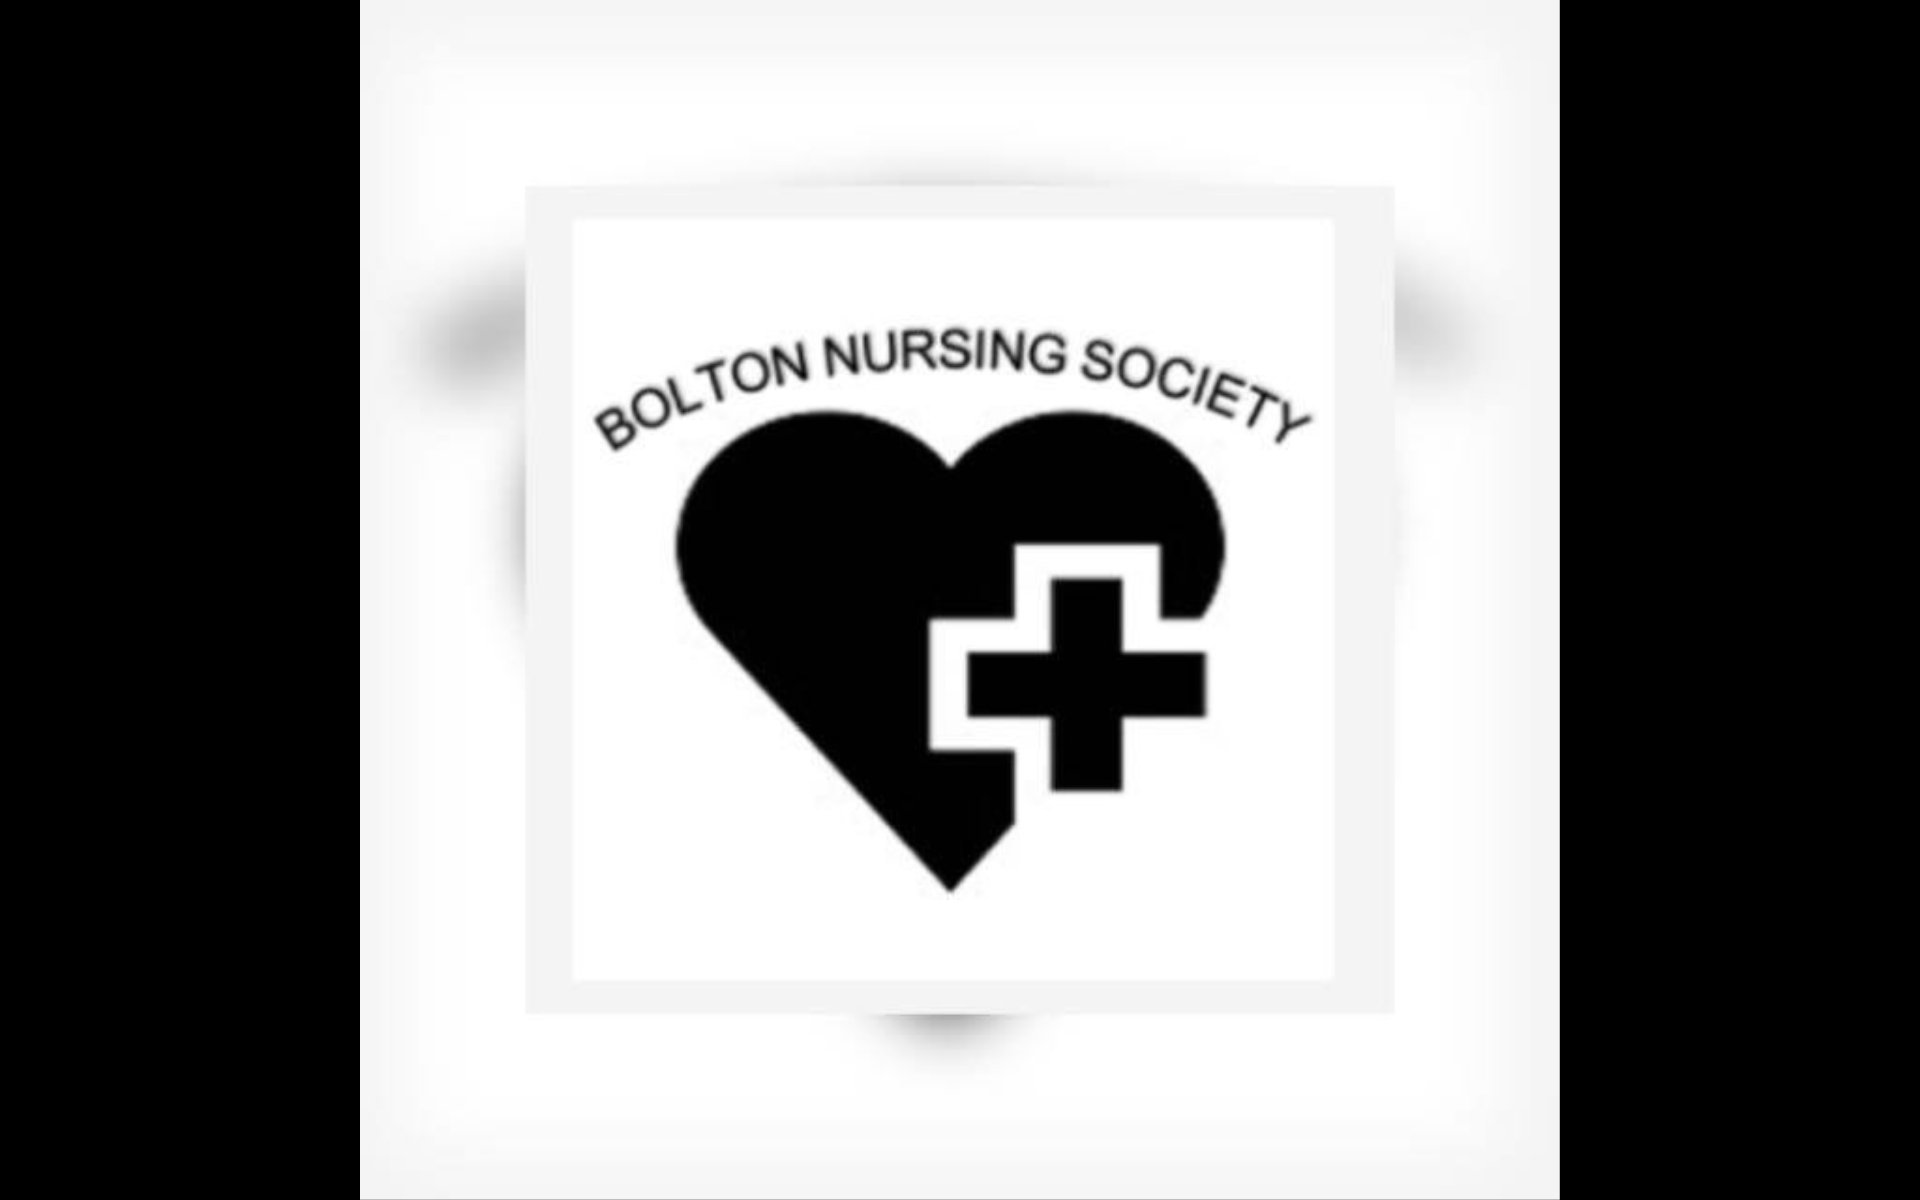 Peer support, news forum and society announcements please follow us on Facebook: @BoltonNursing.